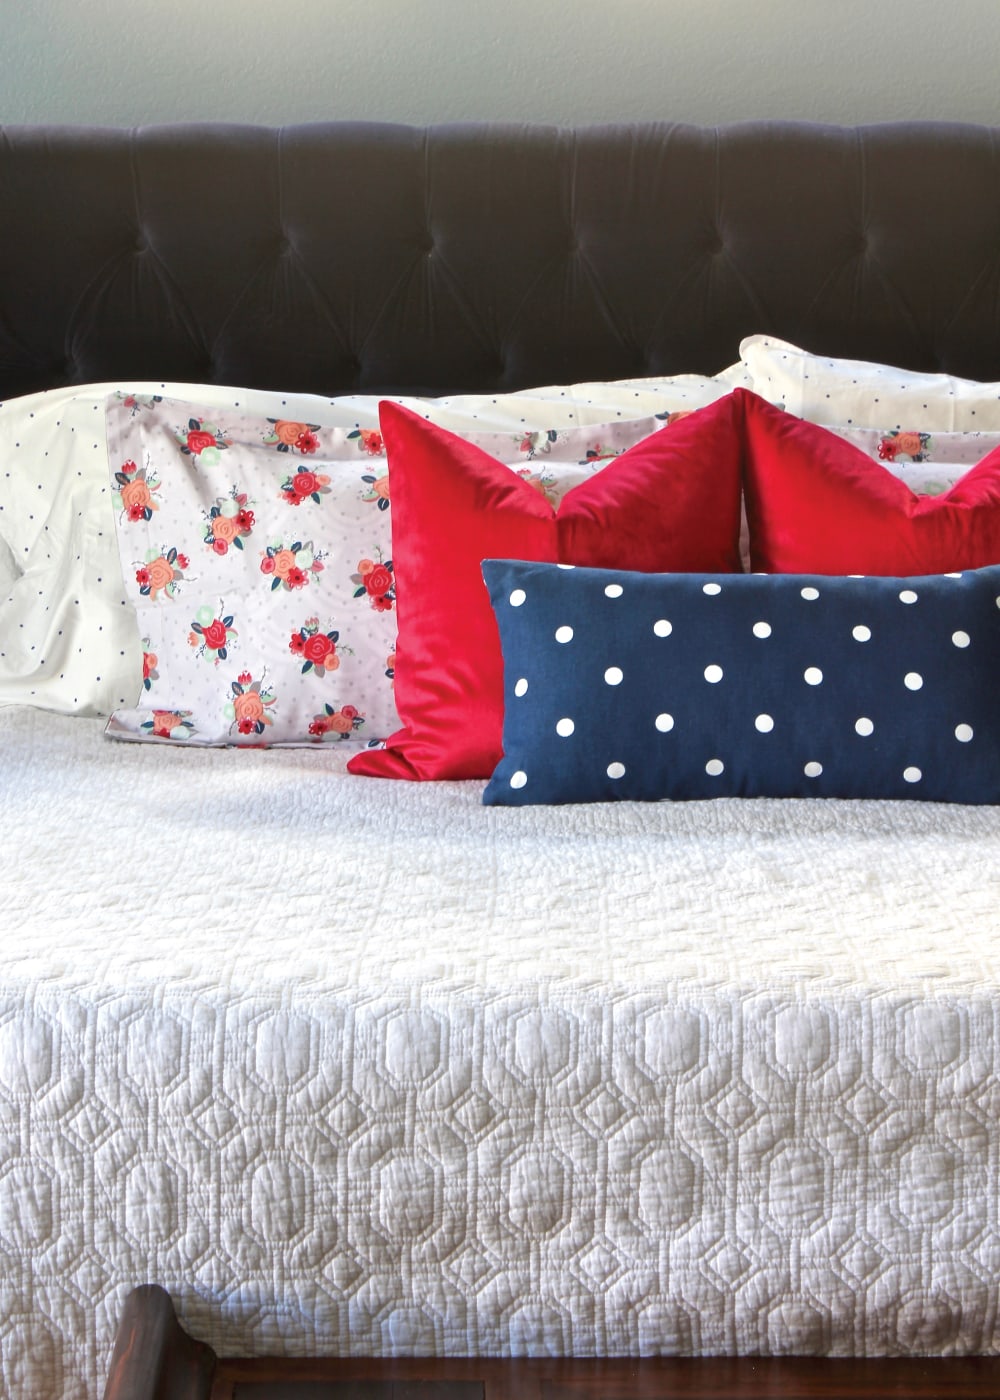 Learn how to mix patterns like a pro by employing these tried-and-true designer tricks!